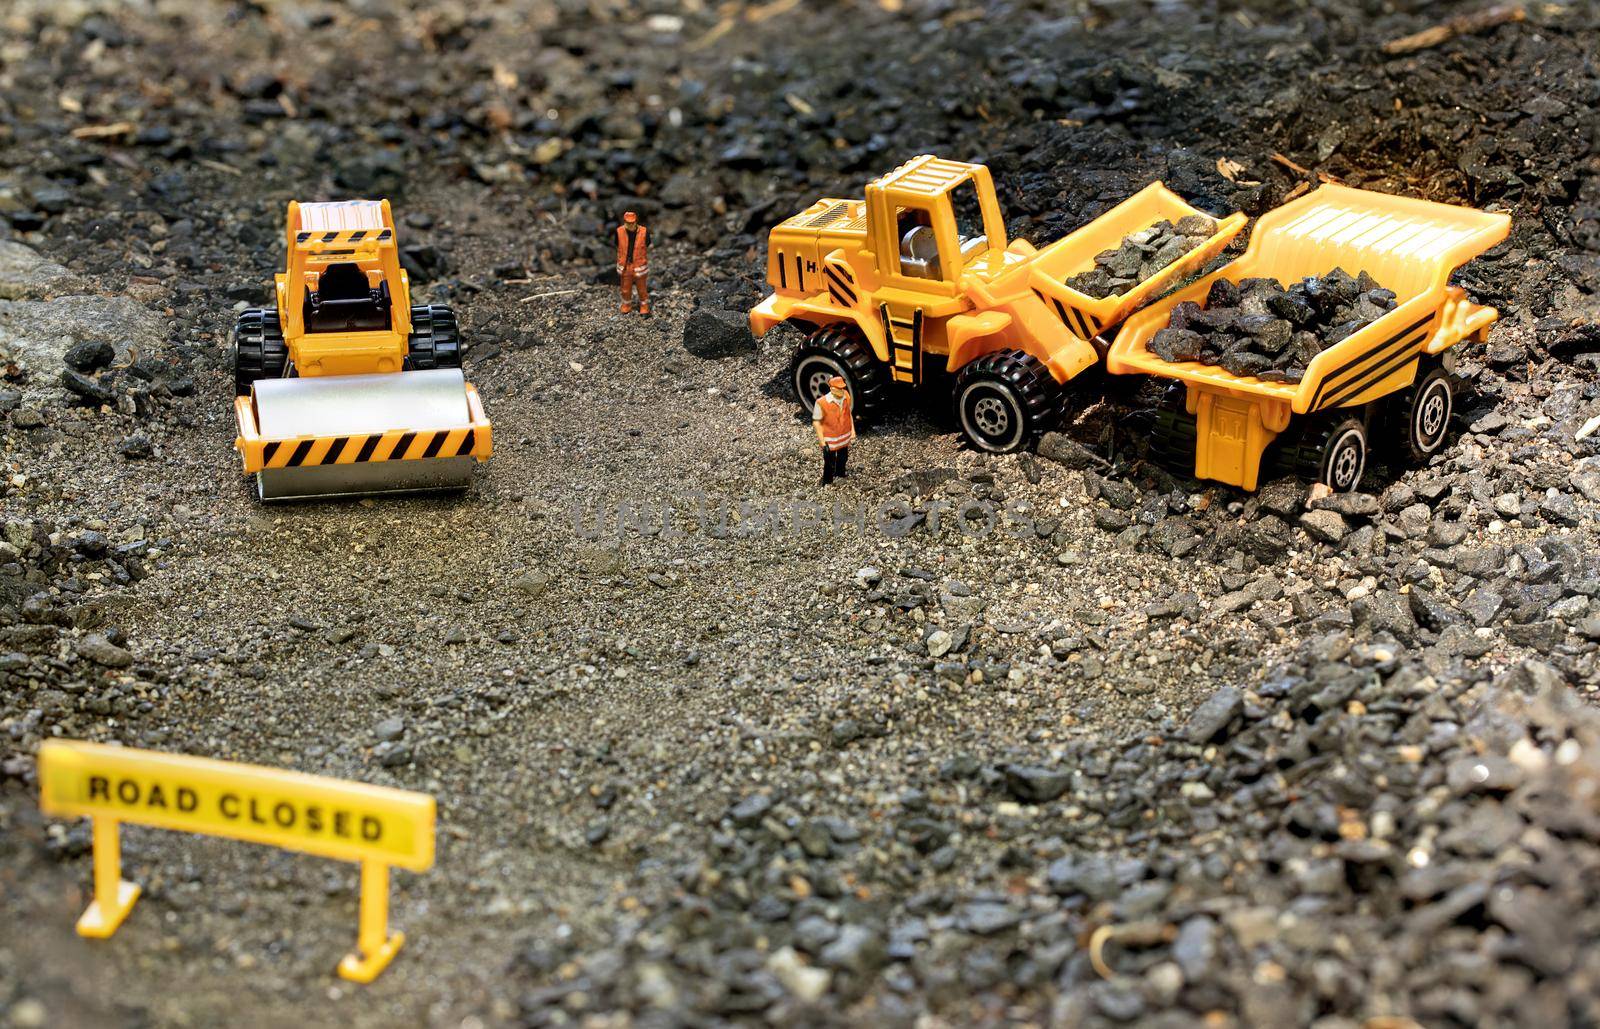 Toy workers in road construction diorama load rocks into haul truck.